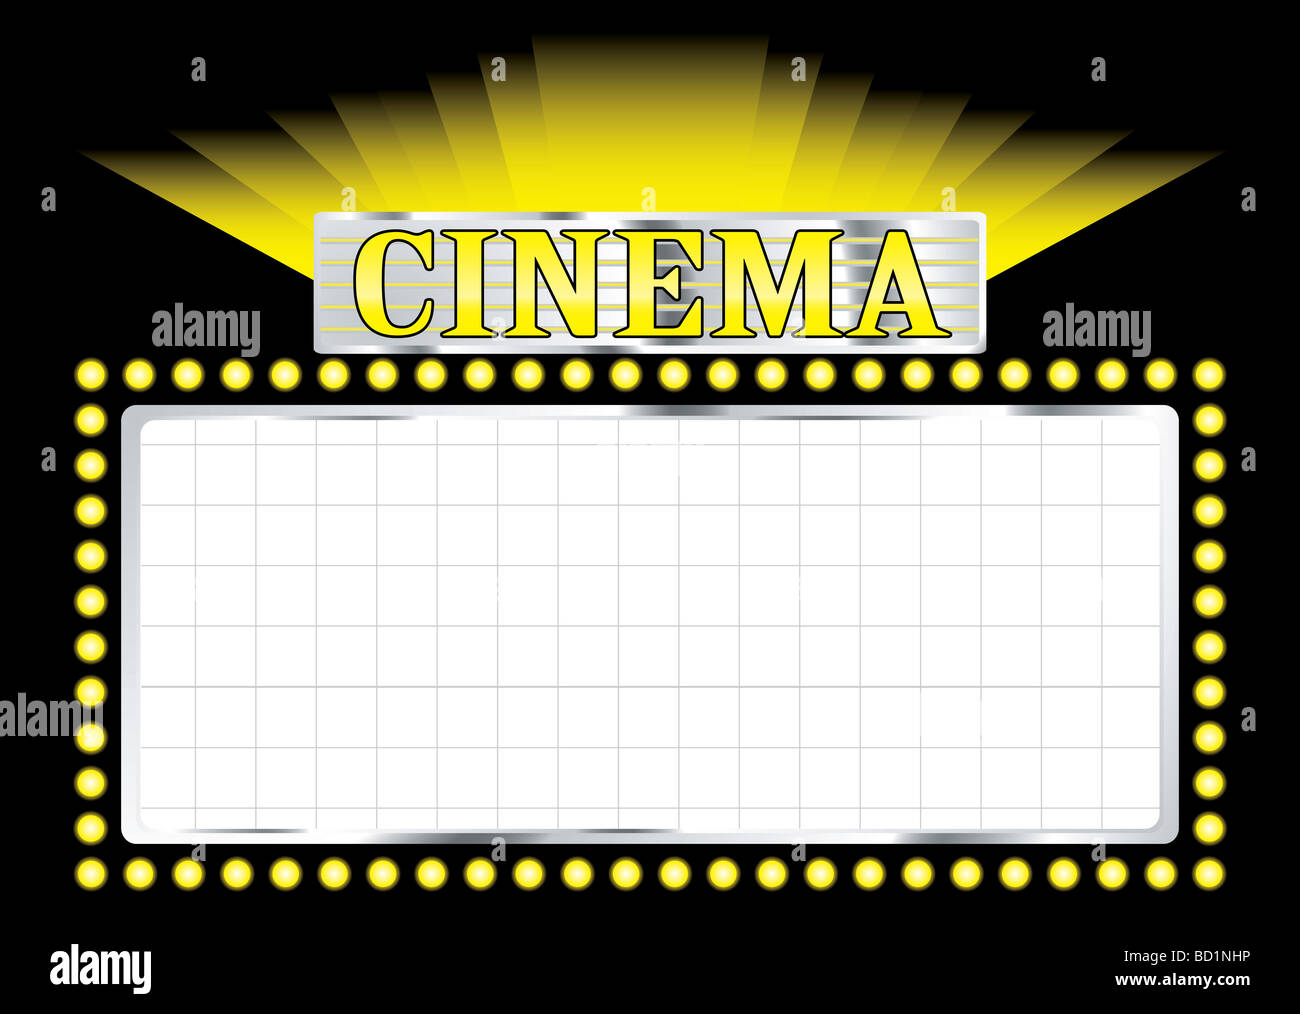 cinema sign concept image with room to add your own text Stock Photo